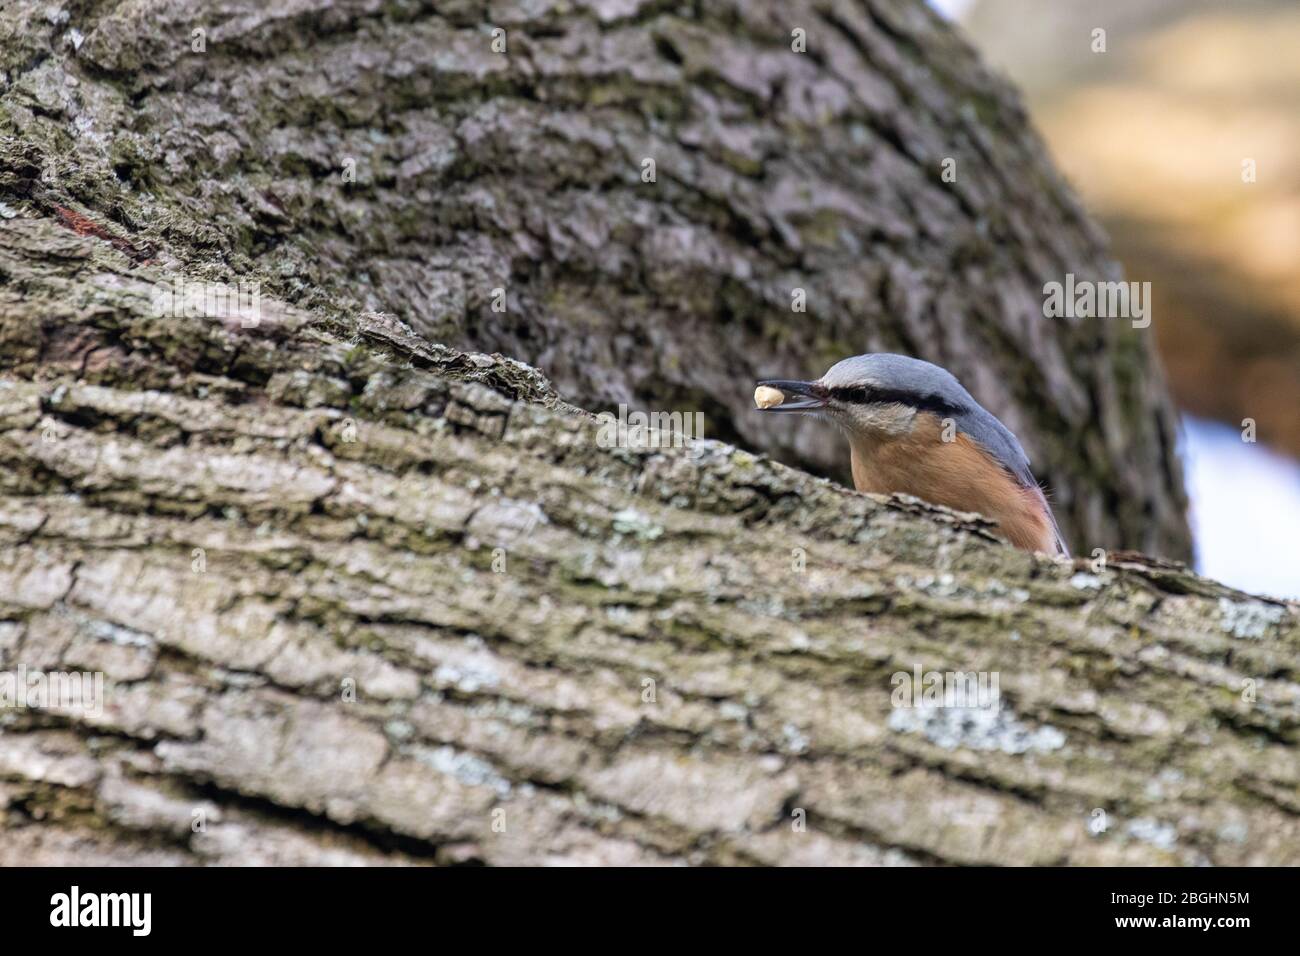 A nuthatch collecting food from the bark of an old oak tree Stock Photo